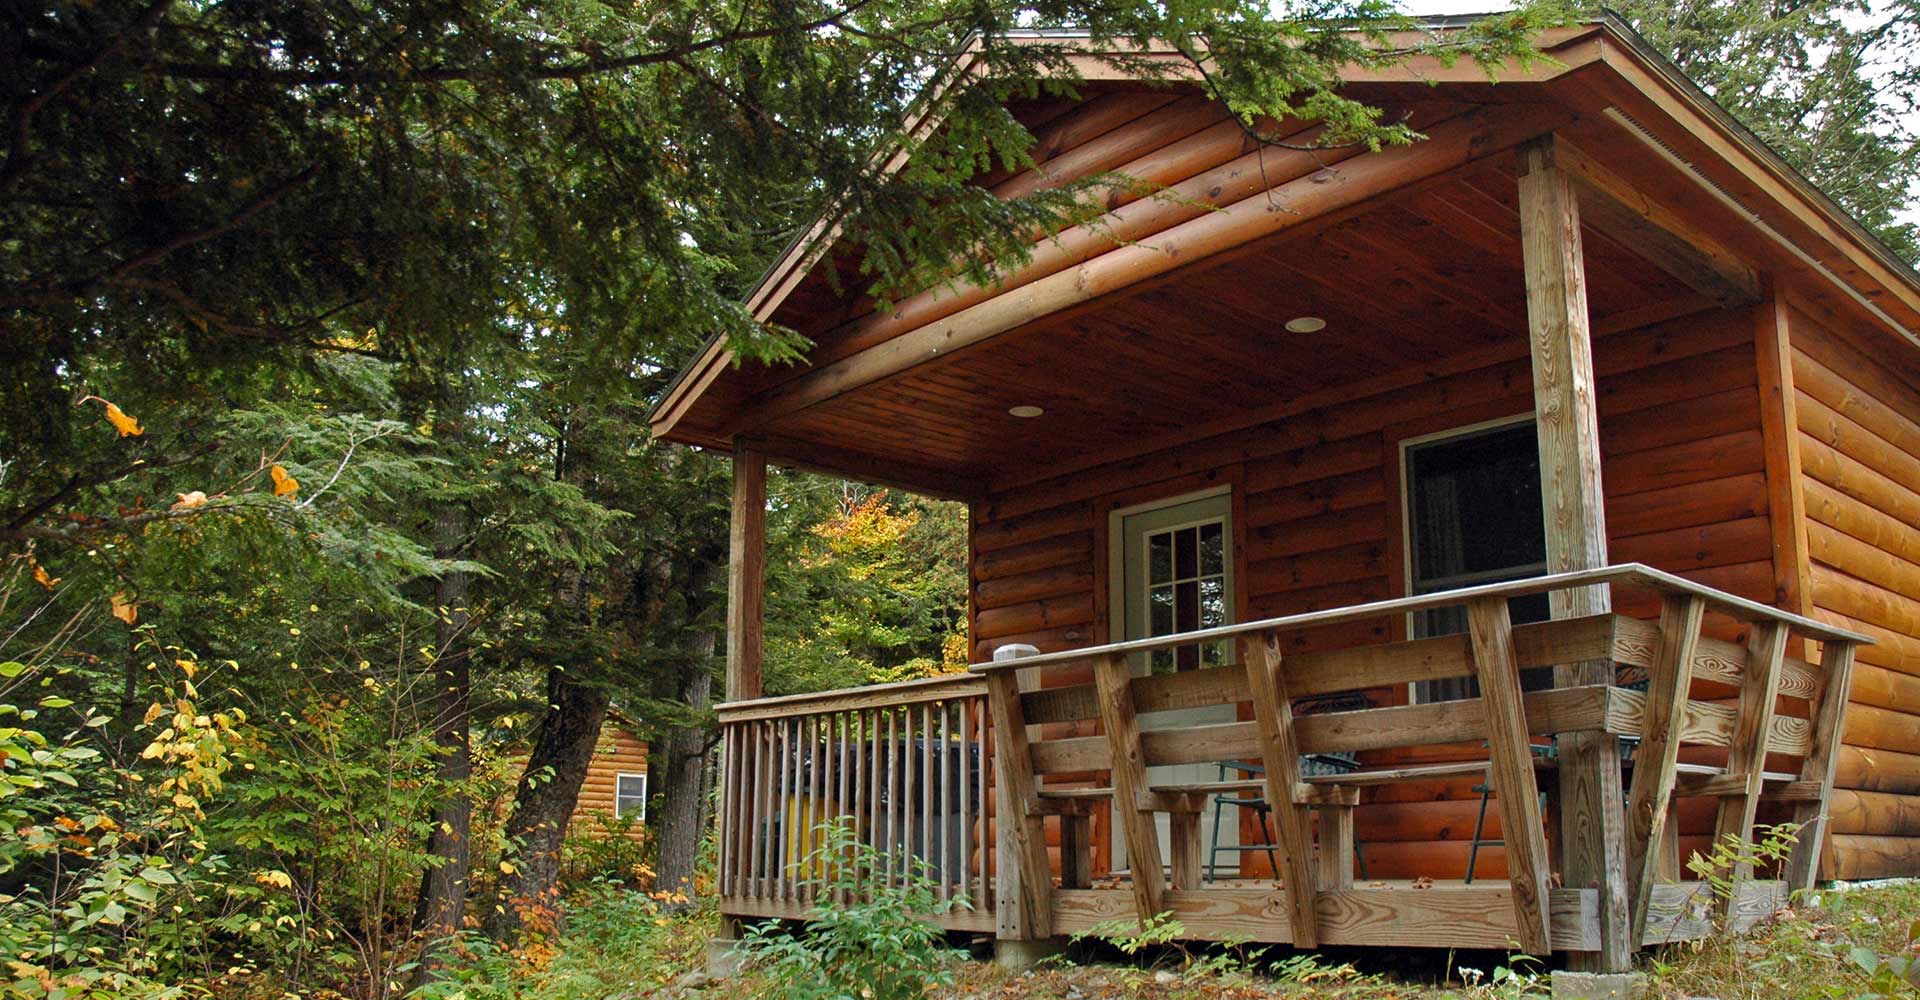 Cozy Cabins - Maine Cabin and Vacation Rentals